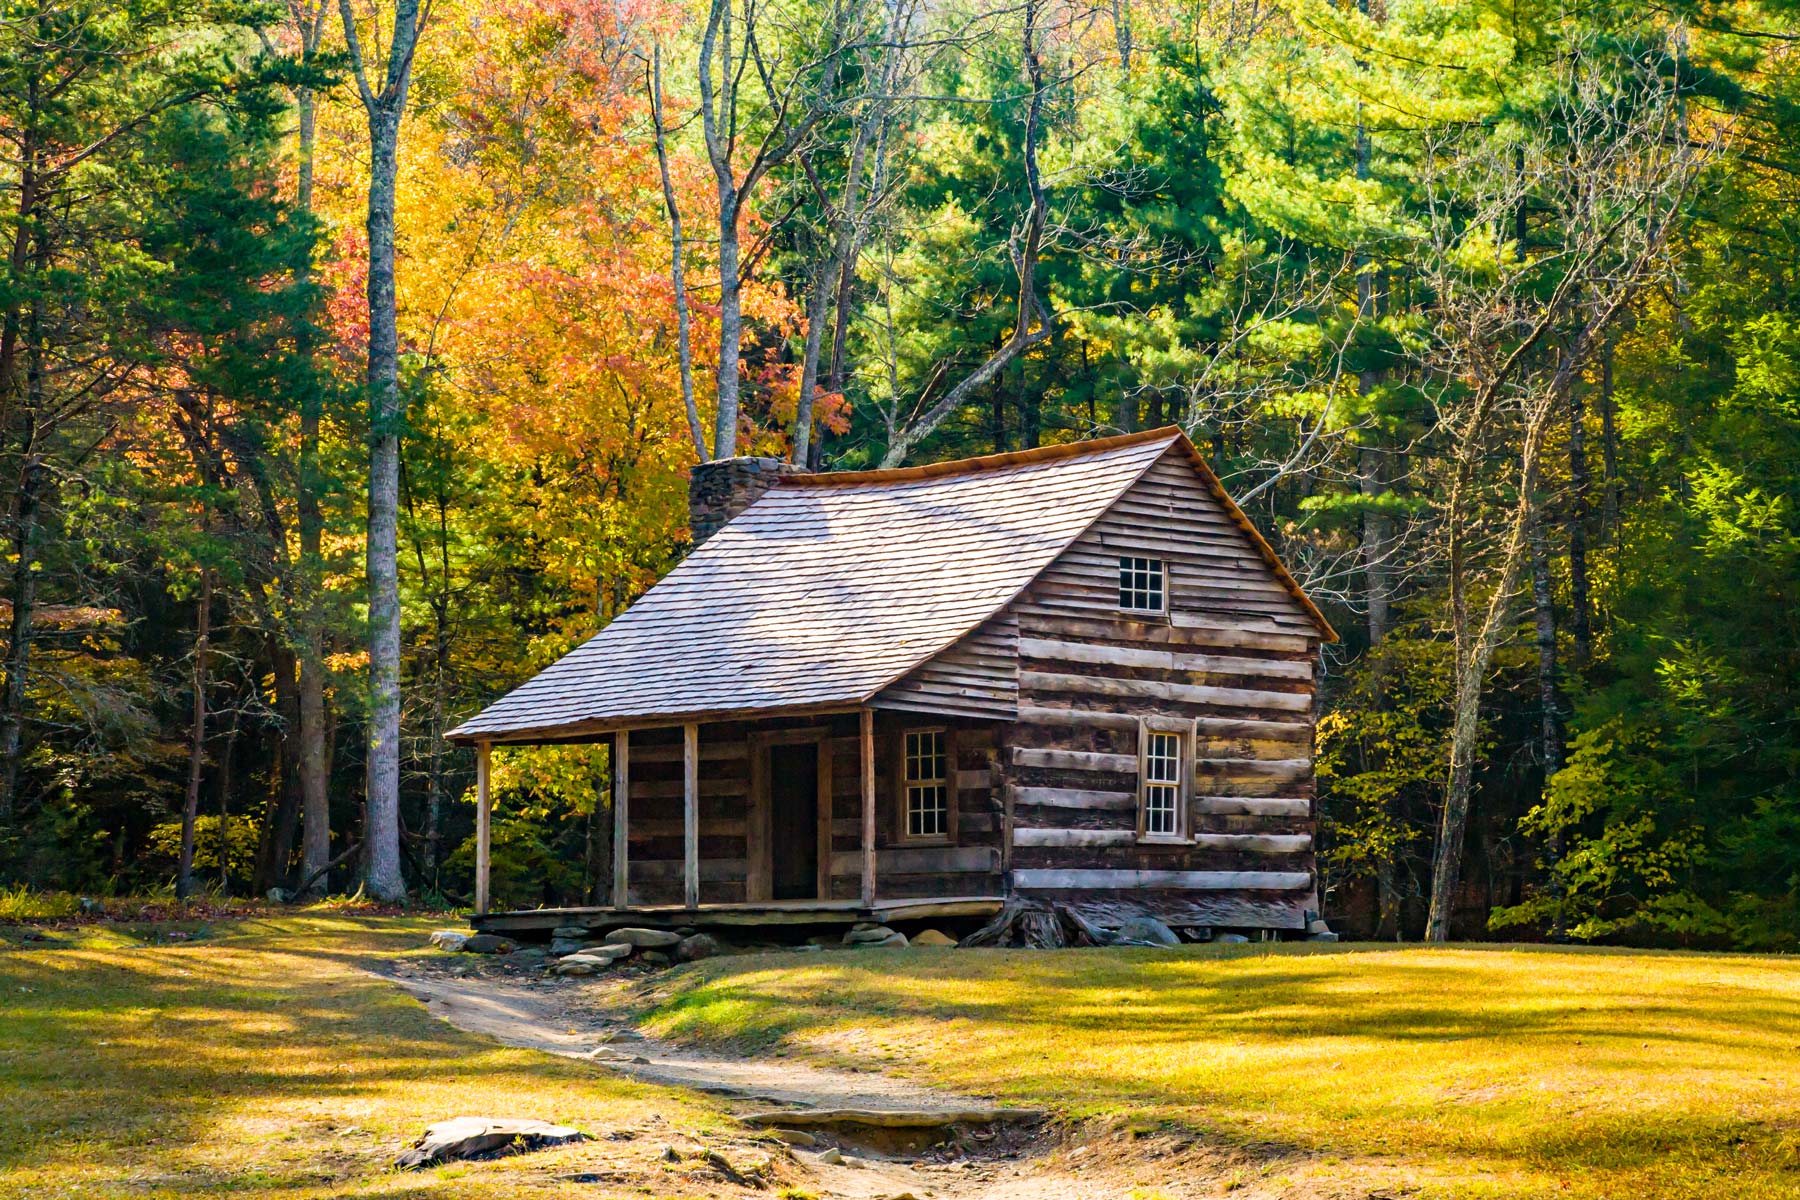 carter shields cabin, cades cove, great smoky mountains national park